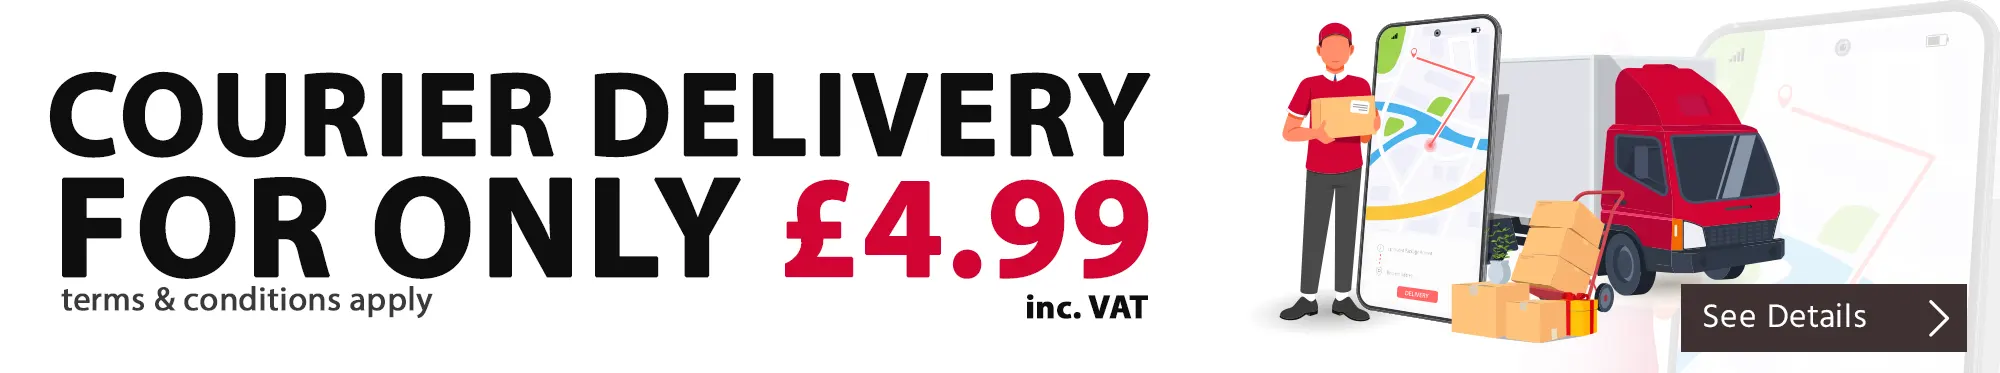 Courier Delivery only £4.99 with MyPostShop.com